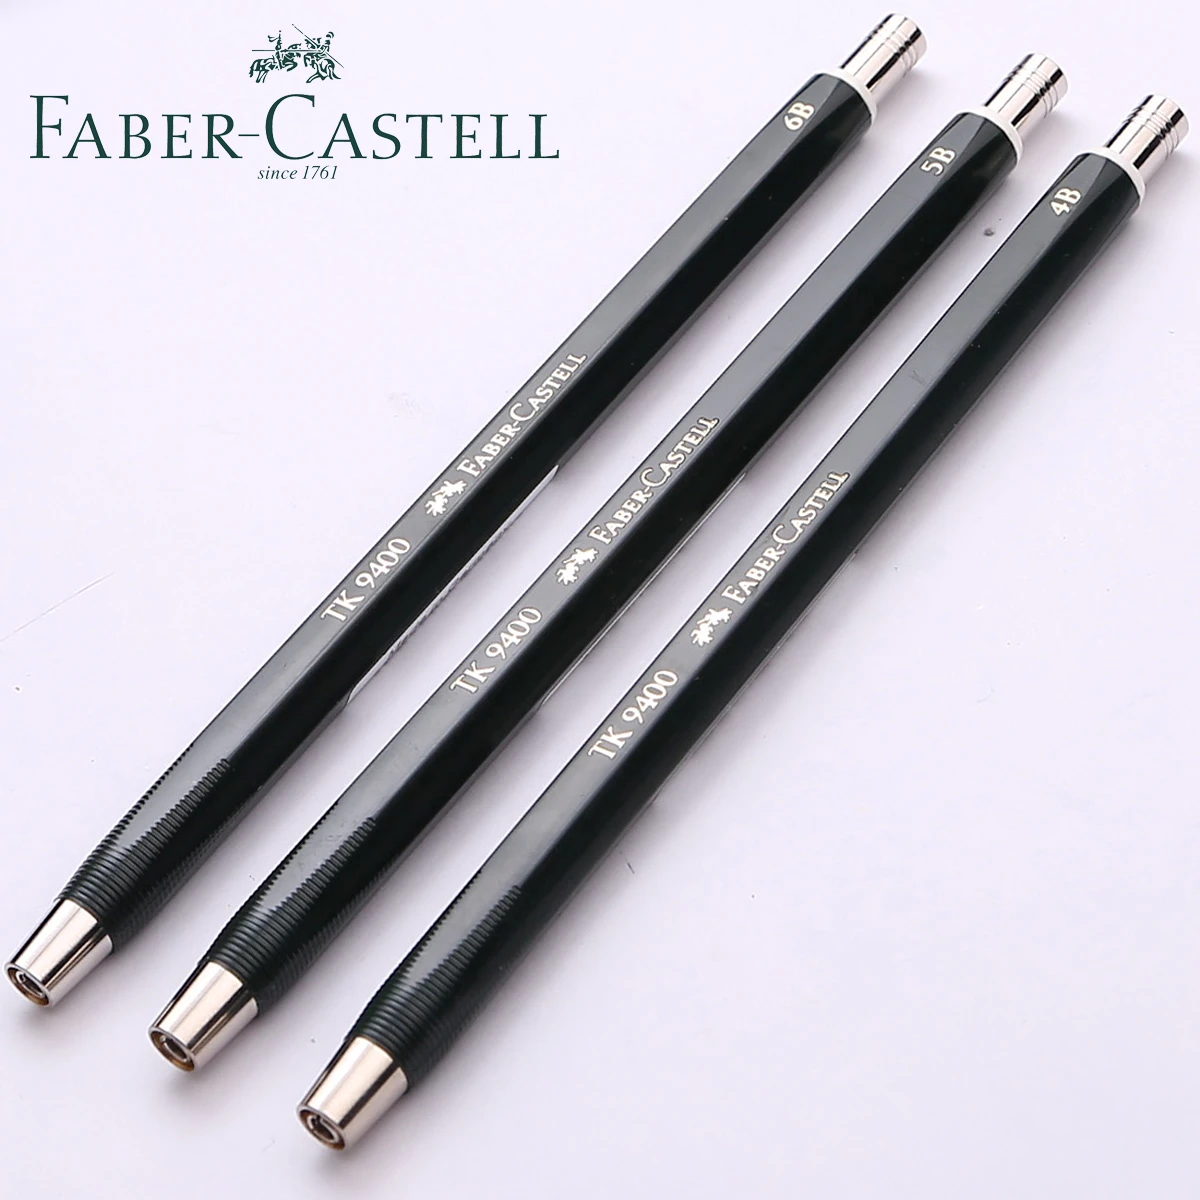 Germany Faber-castell Tk-9400 Mechanical Pencil 3.15mm Drawing Mechanical  Pencil 1pcs - Mechanical Pencils - AliExpress